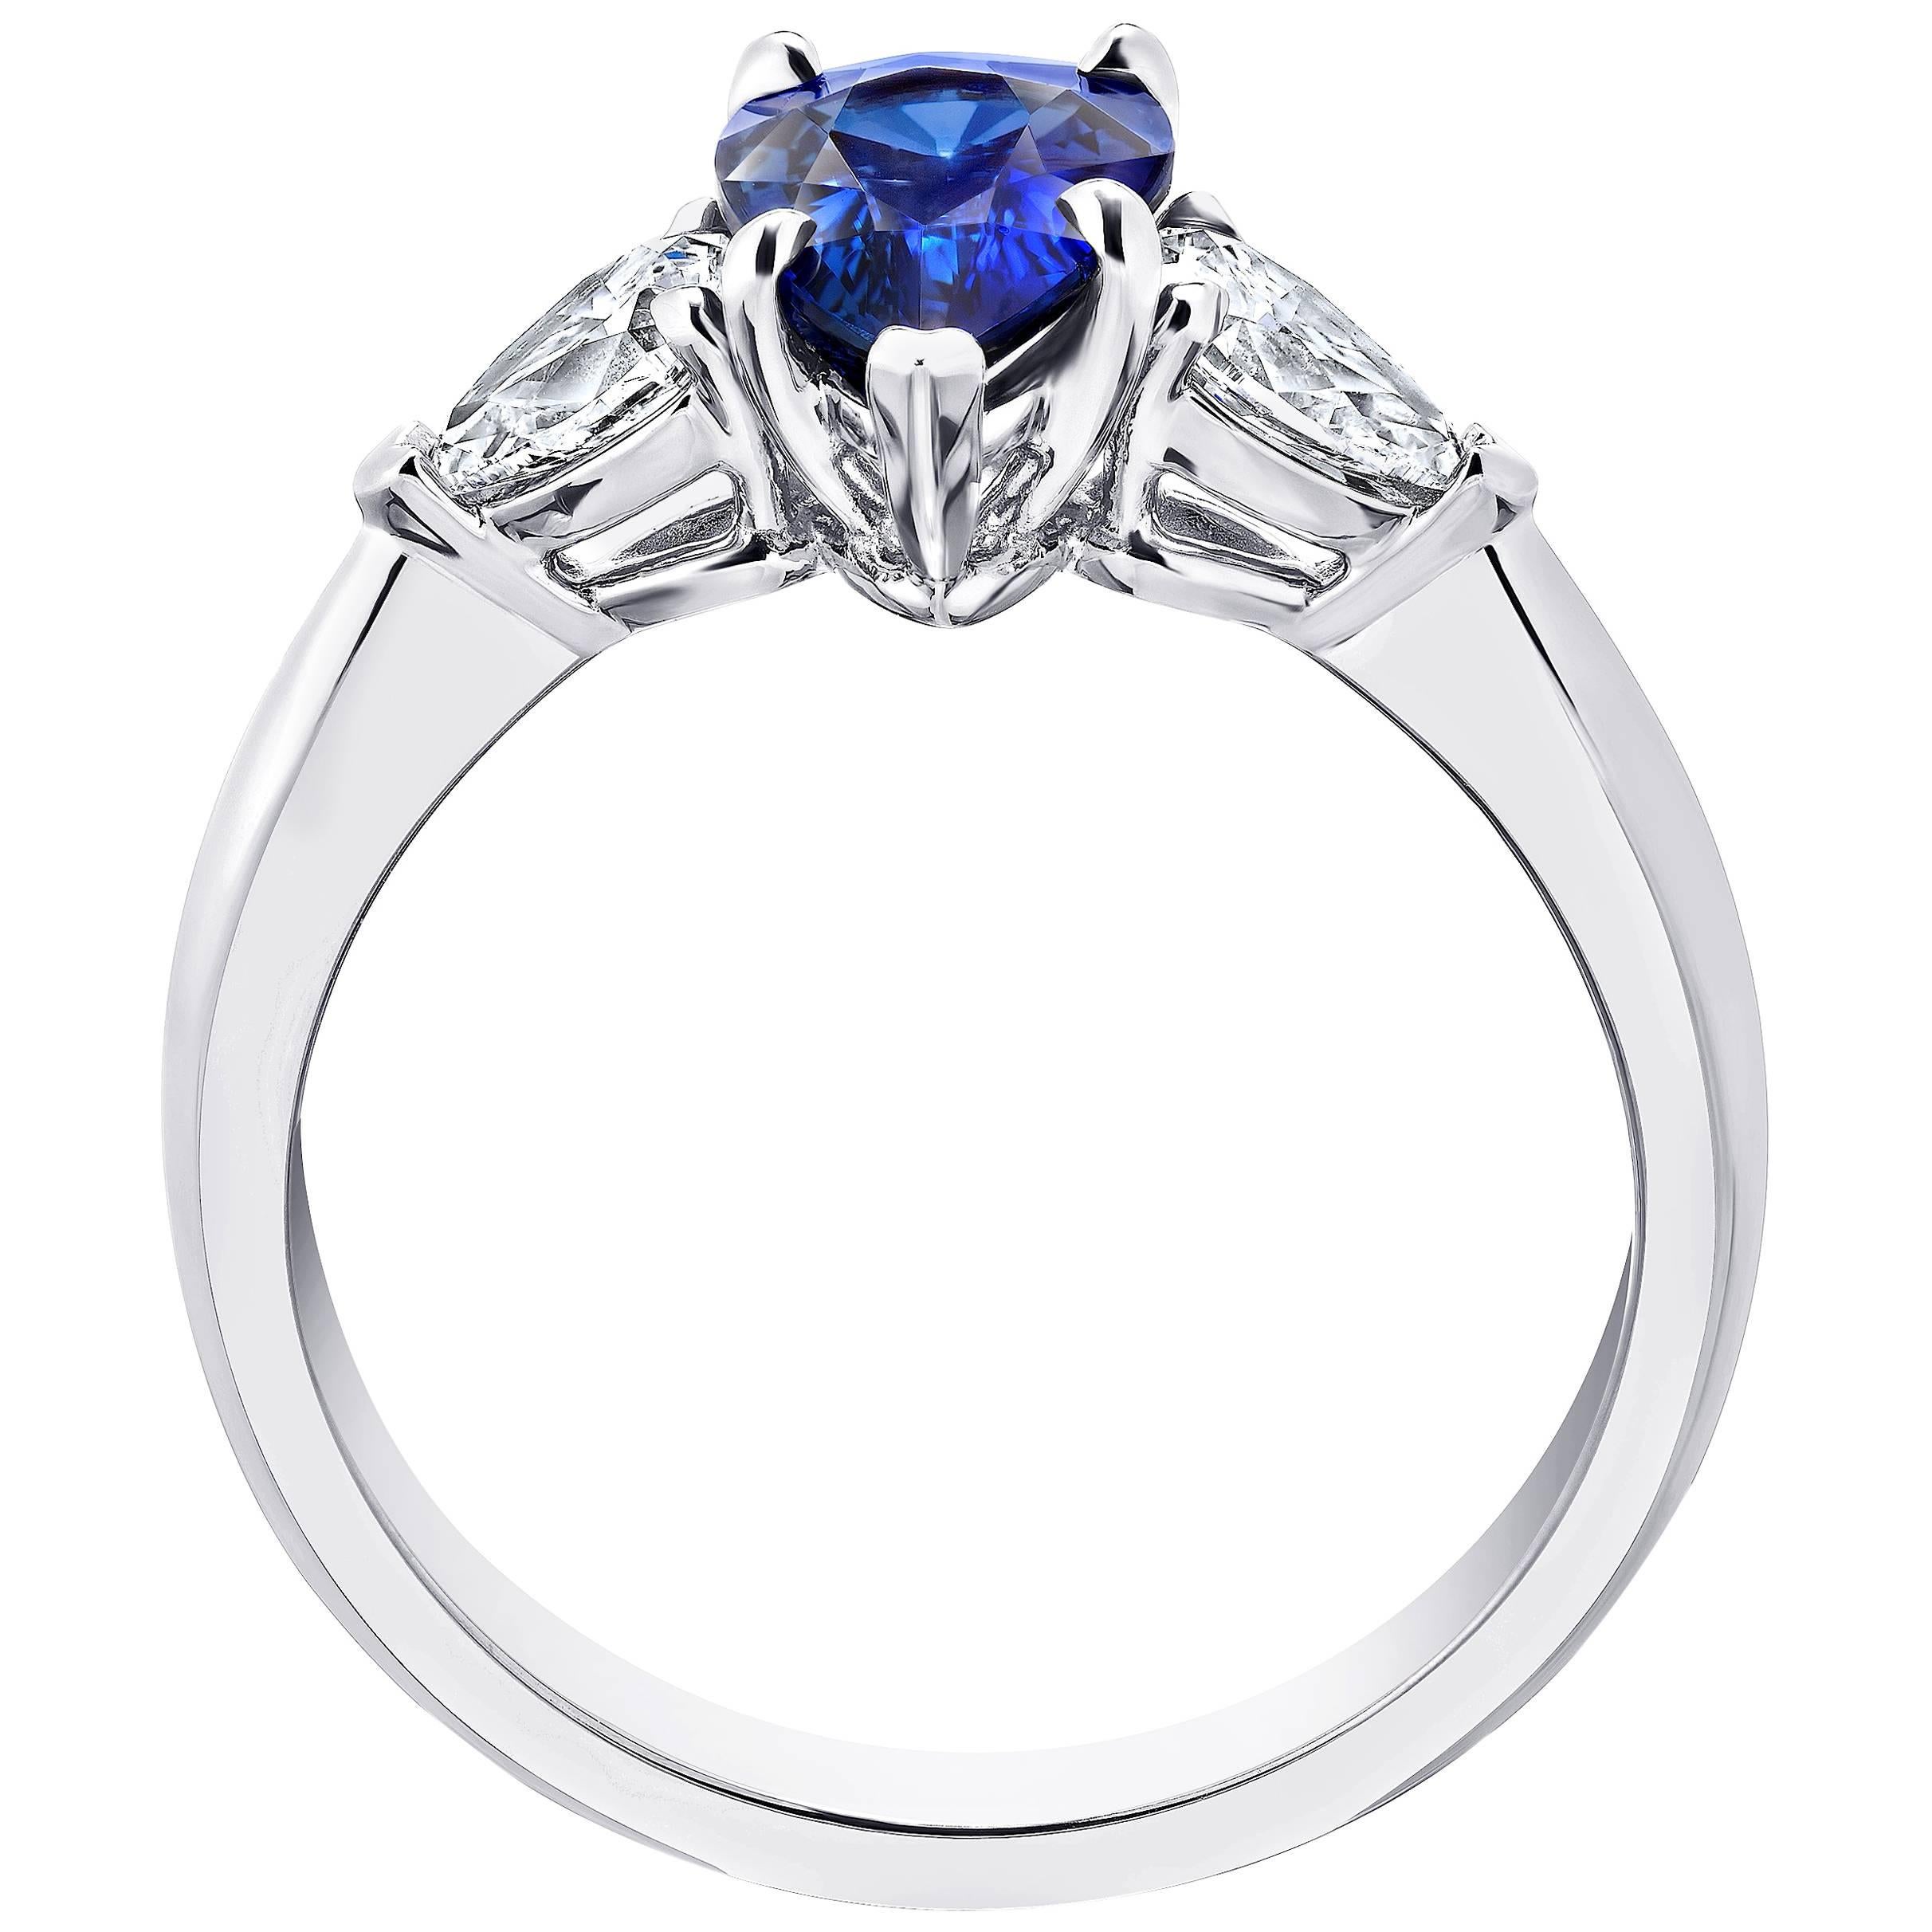 This blue sapphire ring is impeccable. Its center stone is a pear shape blue sapphire weighing 1.61 carats. The stone is perfectly cut and extremely clean with great  color saturation. Two pear shape diamonds weighing .56 carats (F+ VS+)  seamlessly